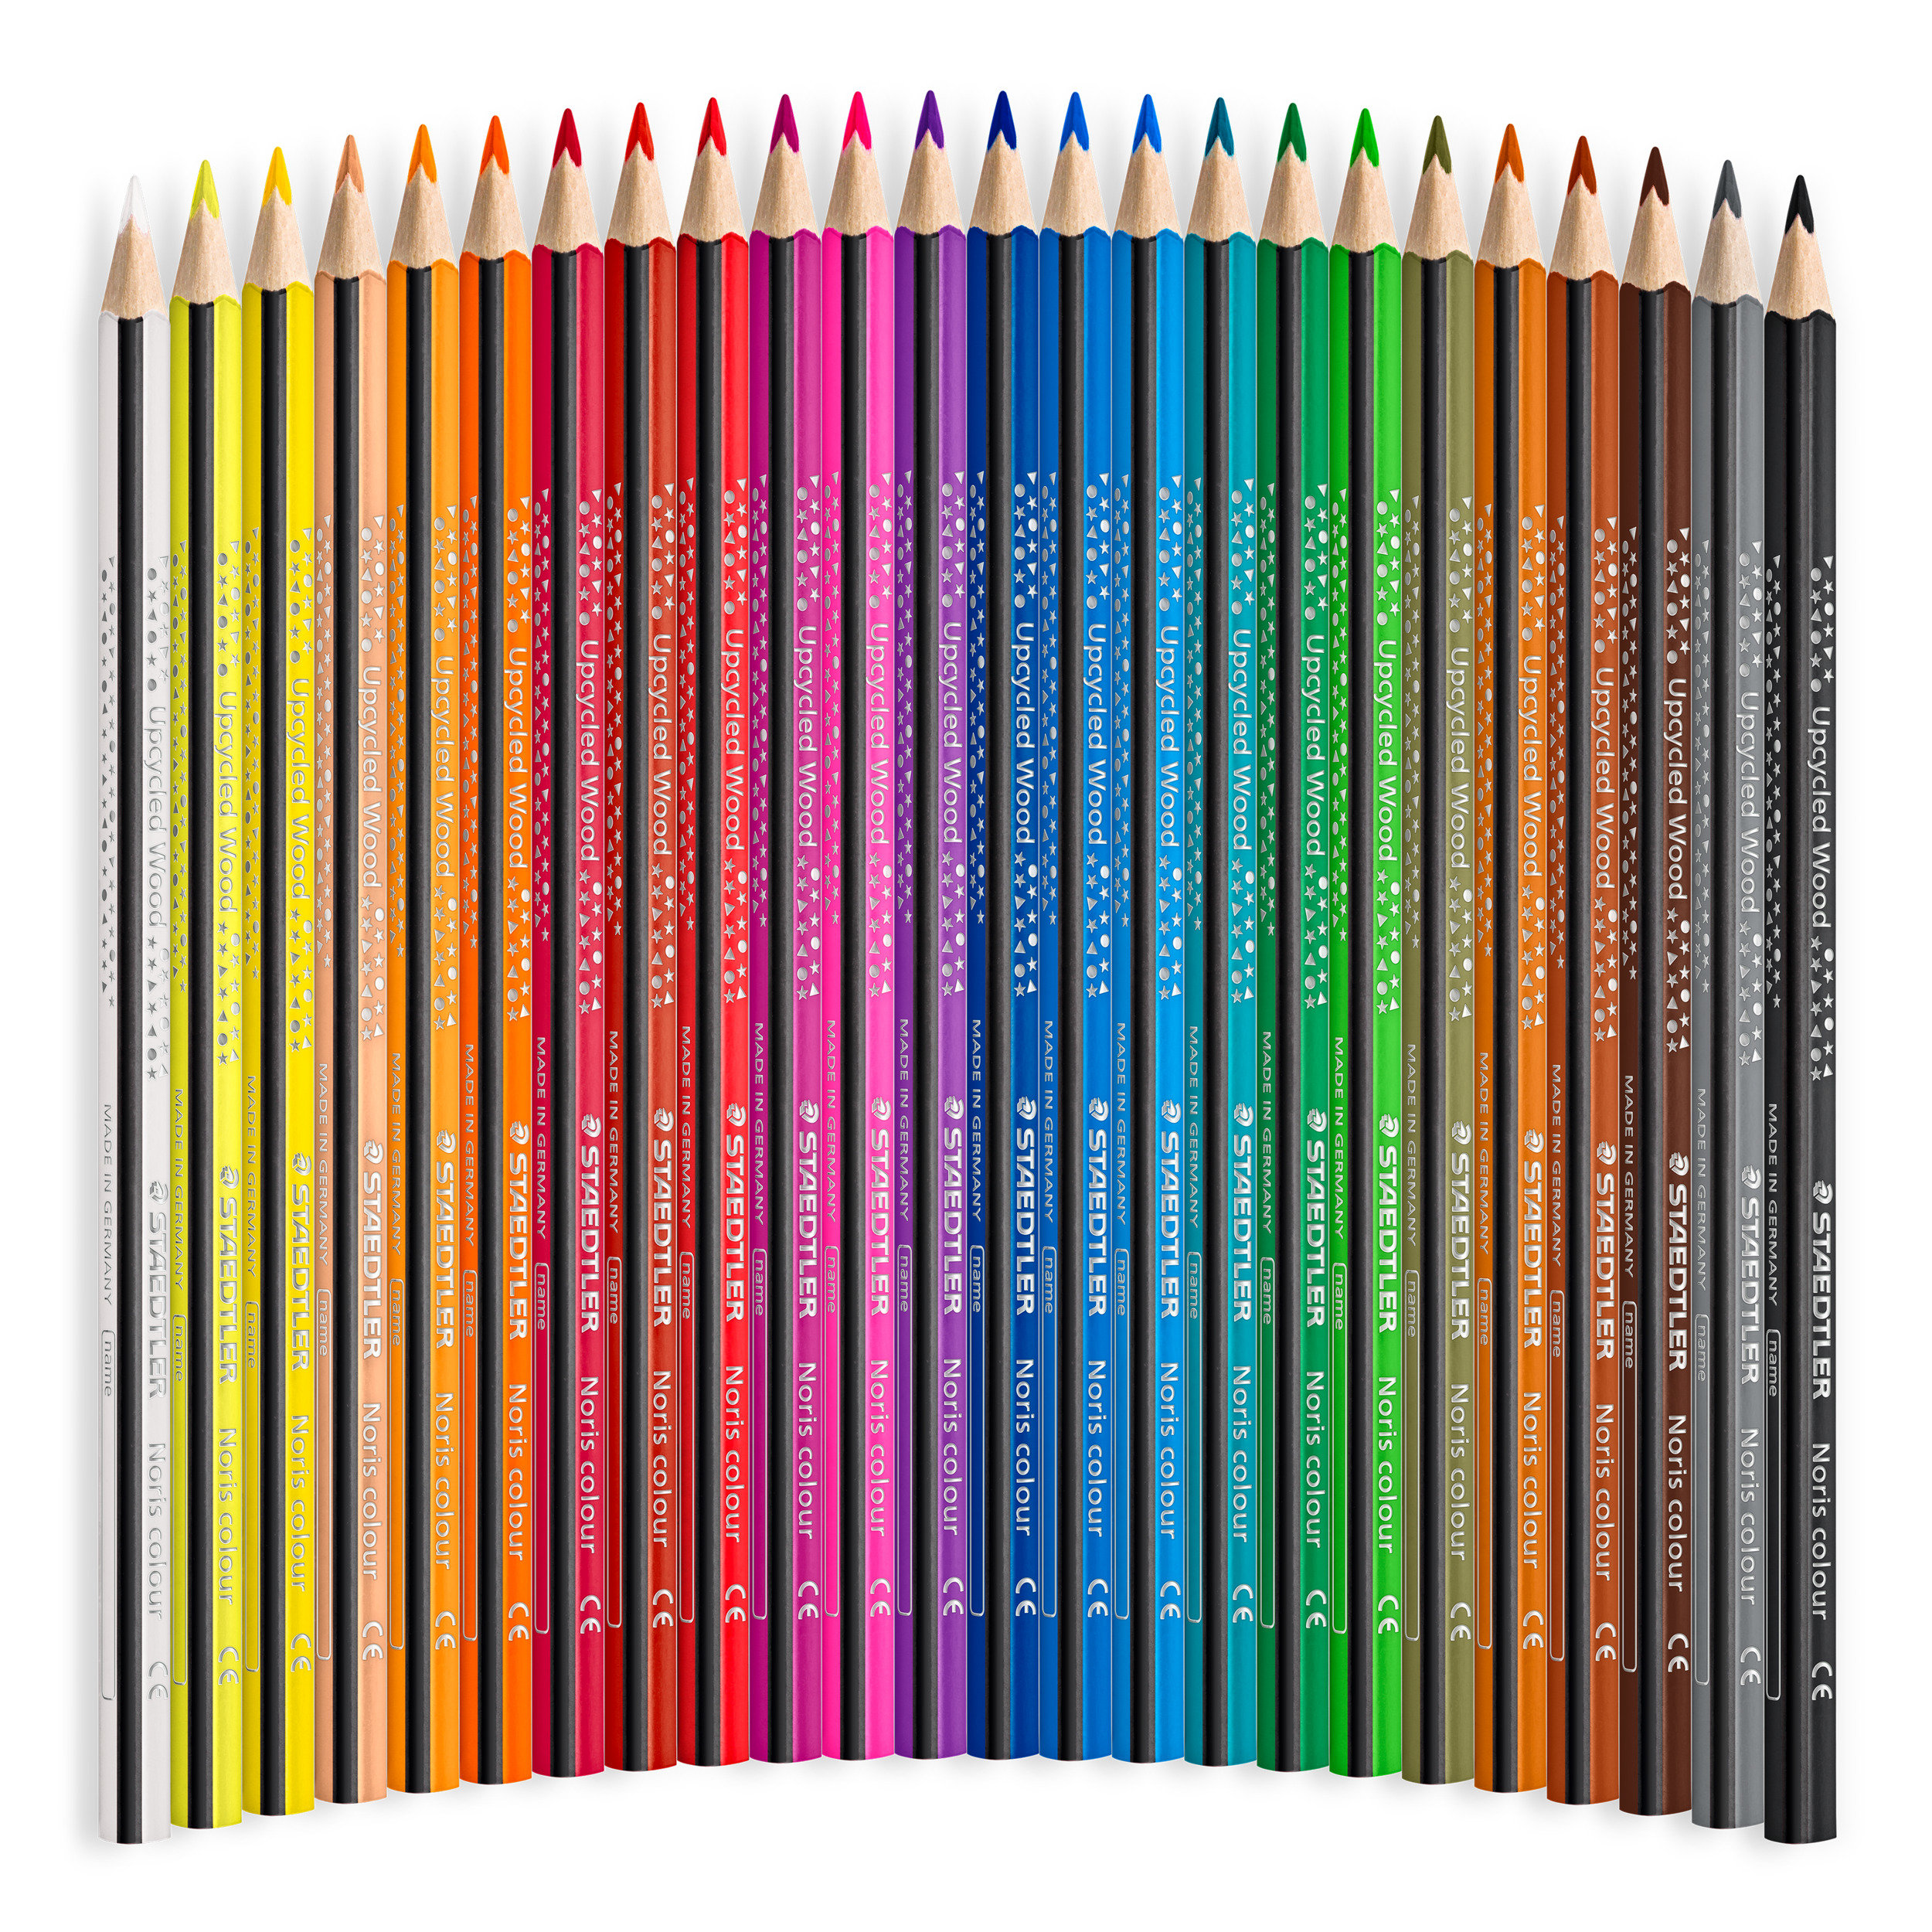 STAEDTLER Crayons couleur Noris 187C2403 upcycled Wood 24 pcs.